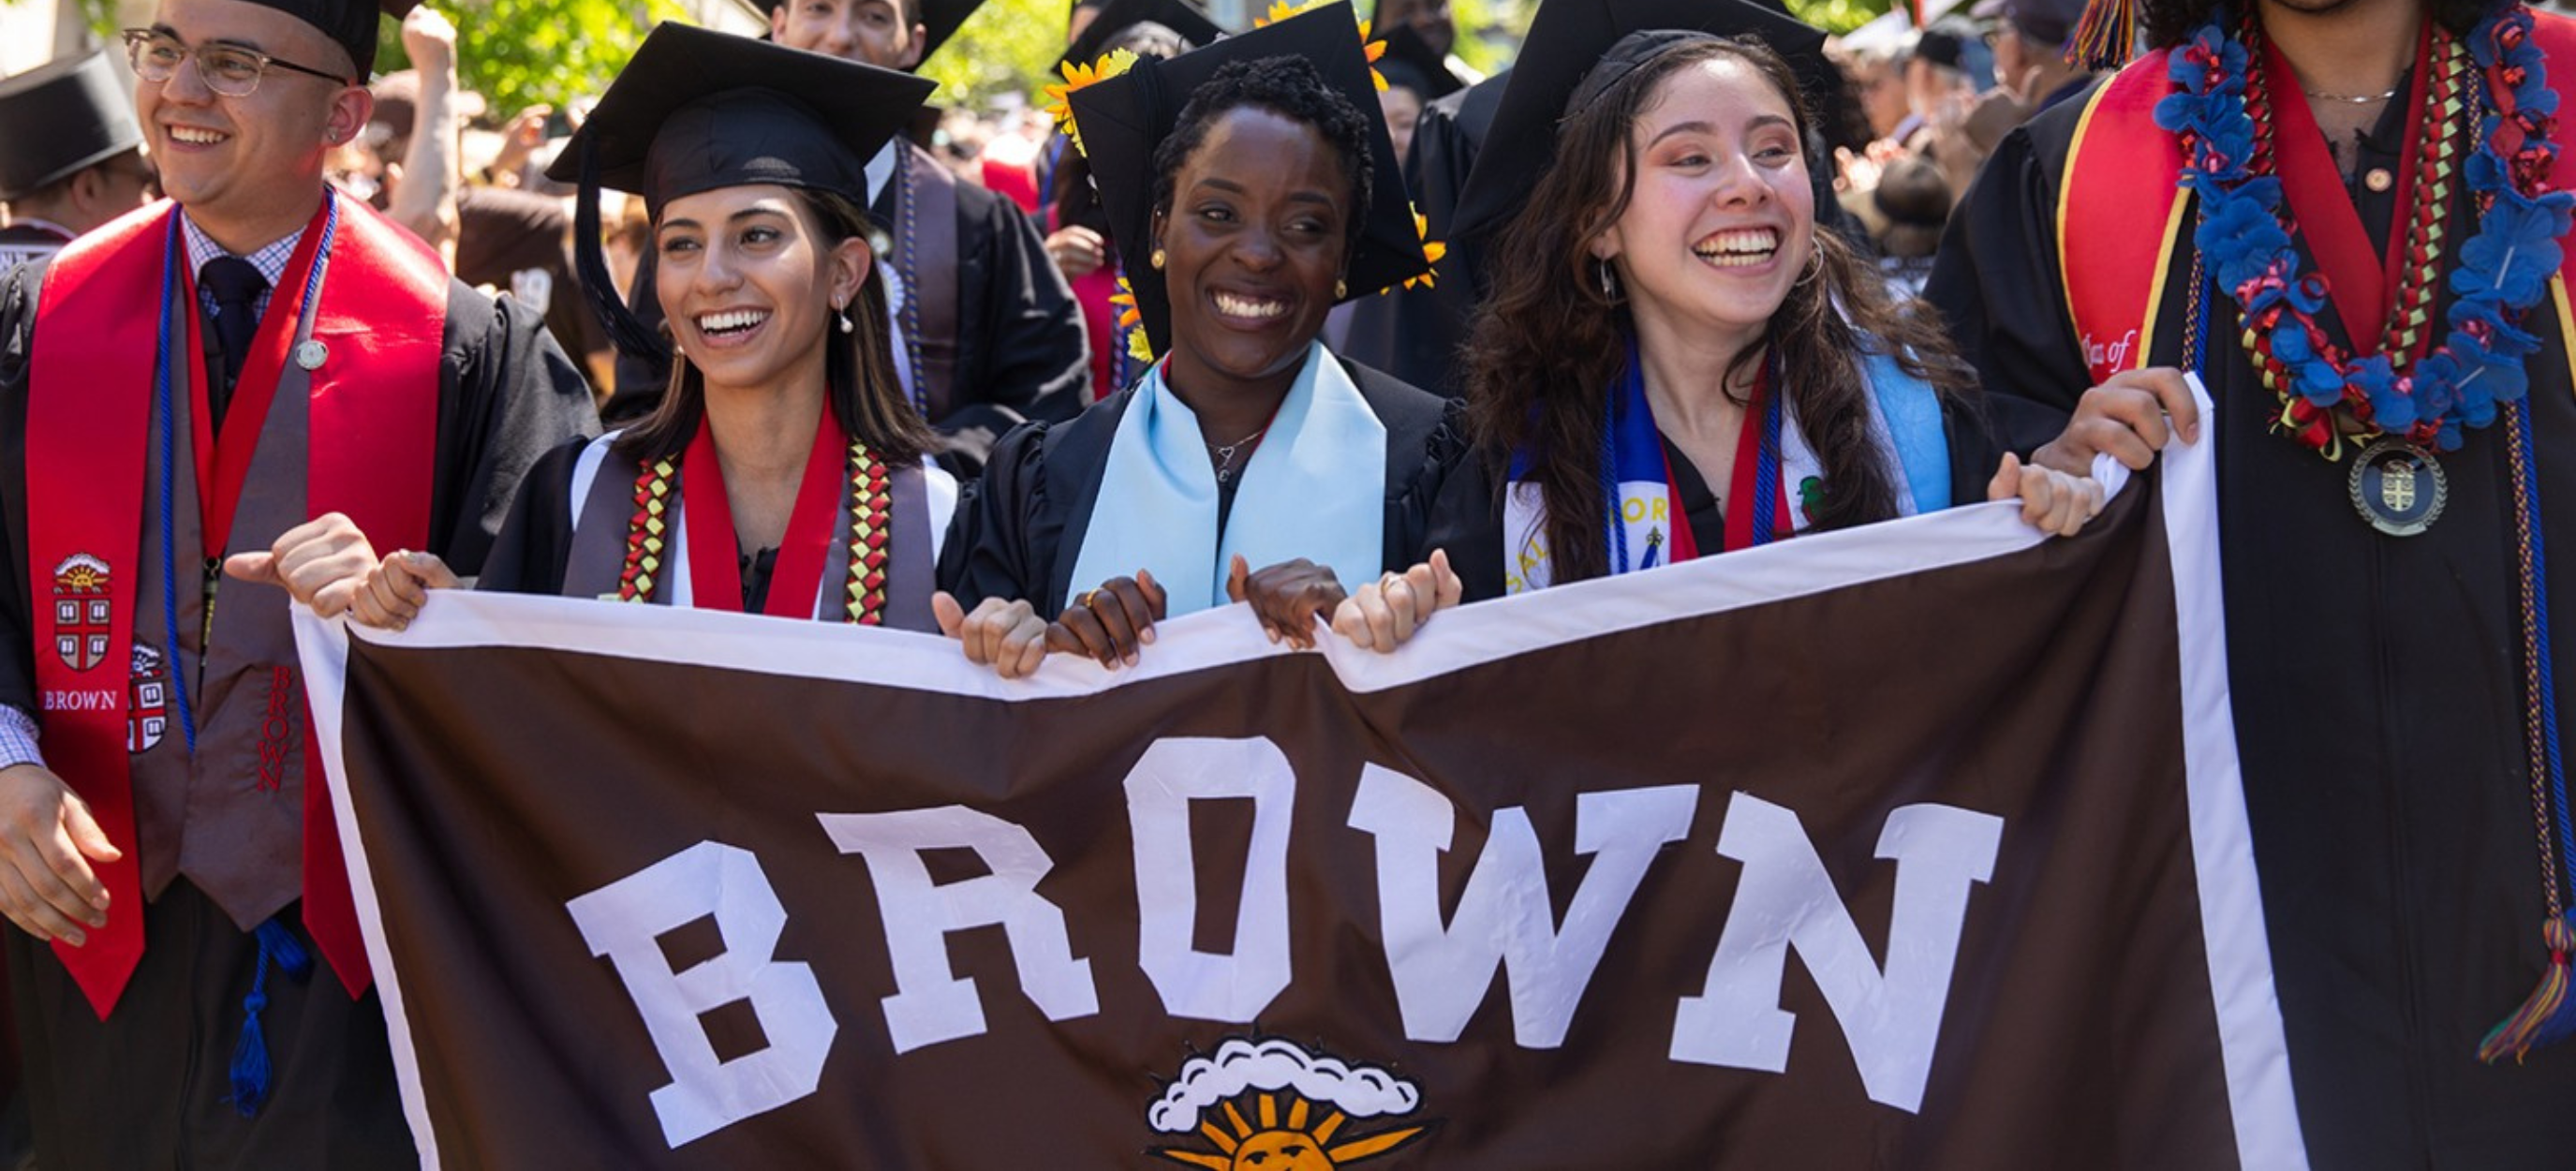 How to Get into Brown University